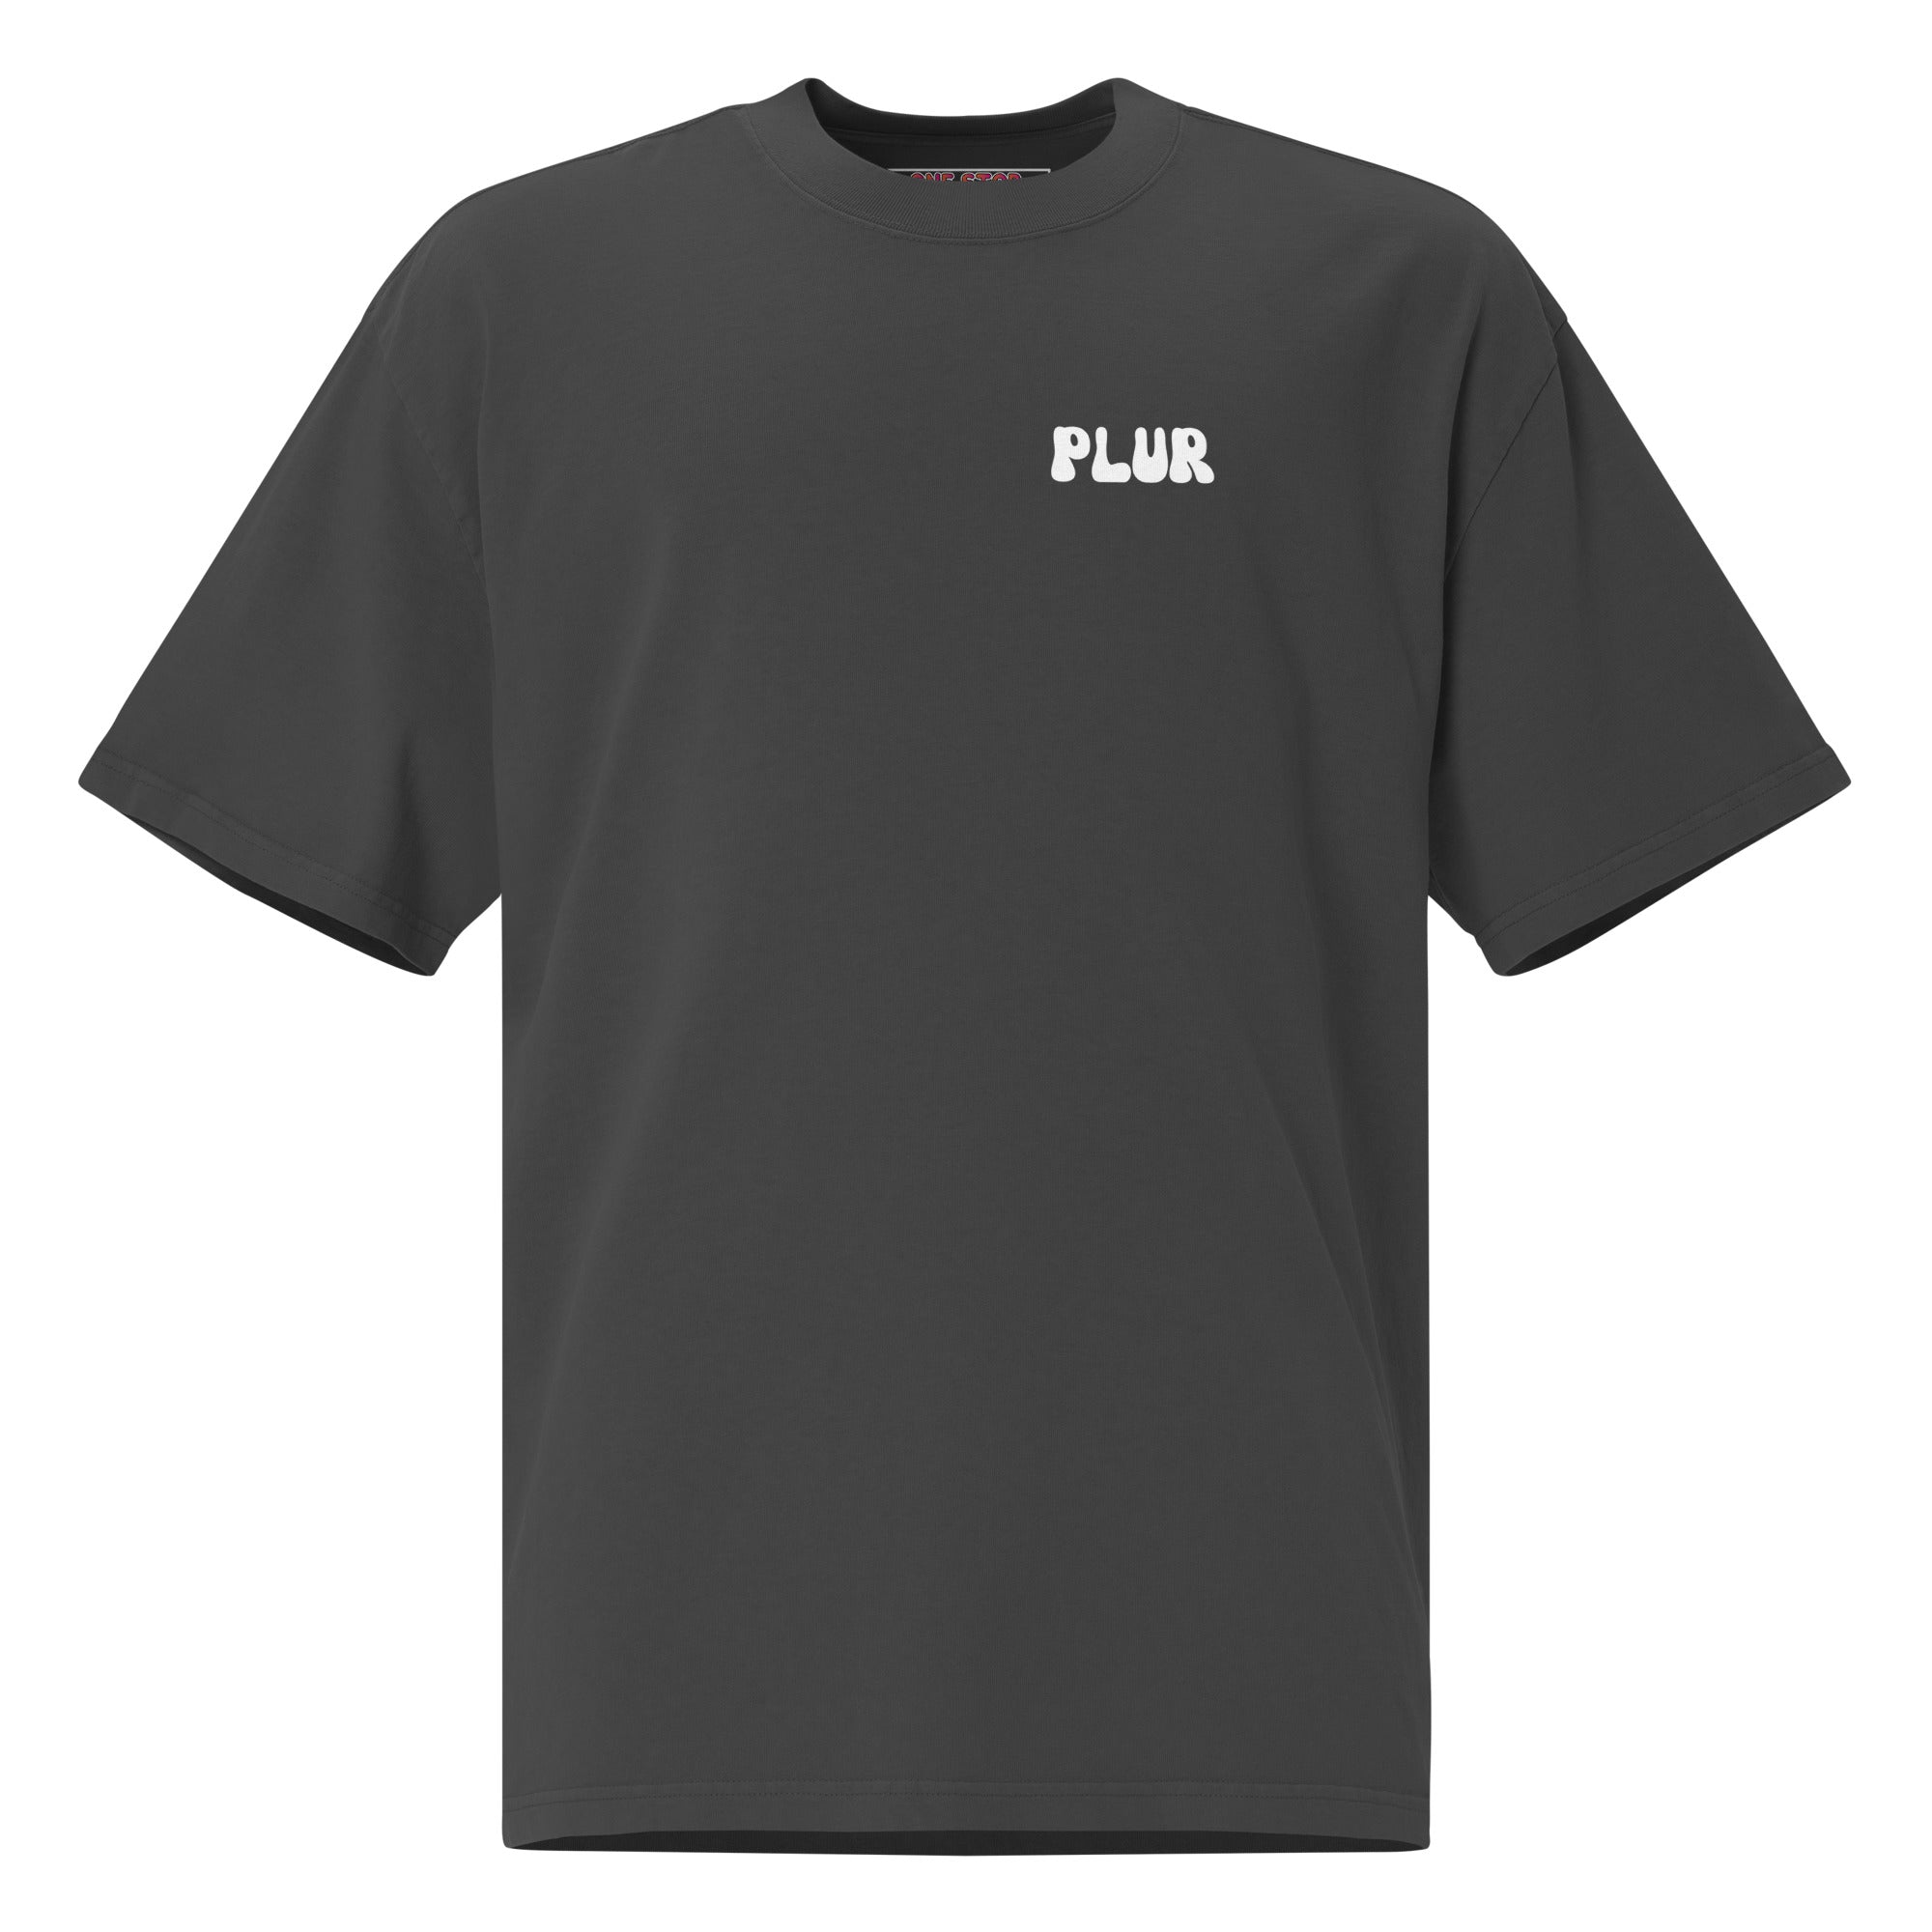 PLUR Oversized Faded T-Shirt